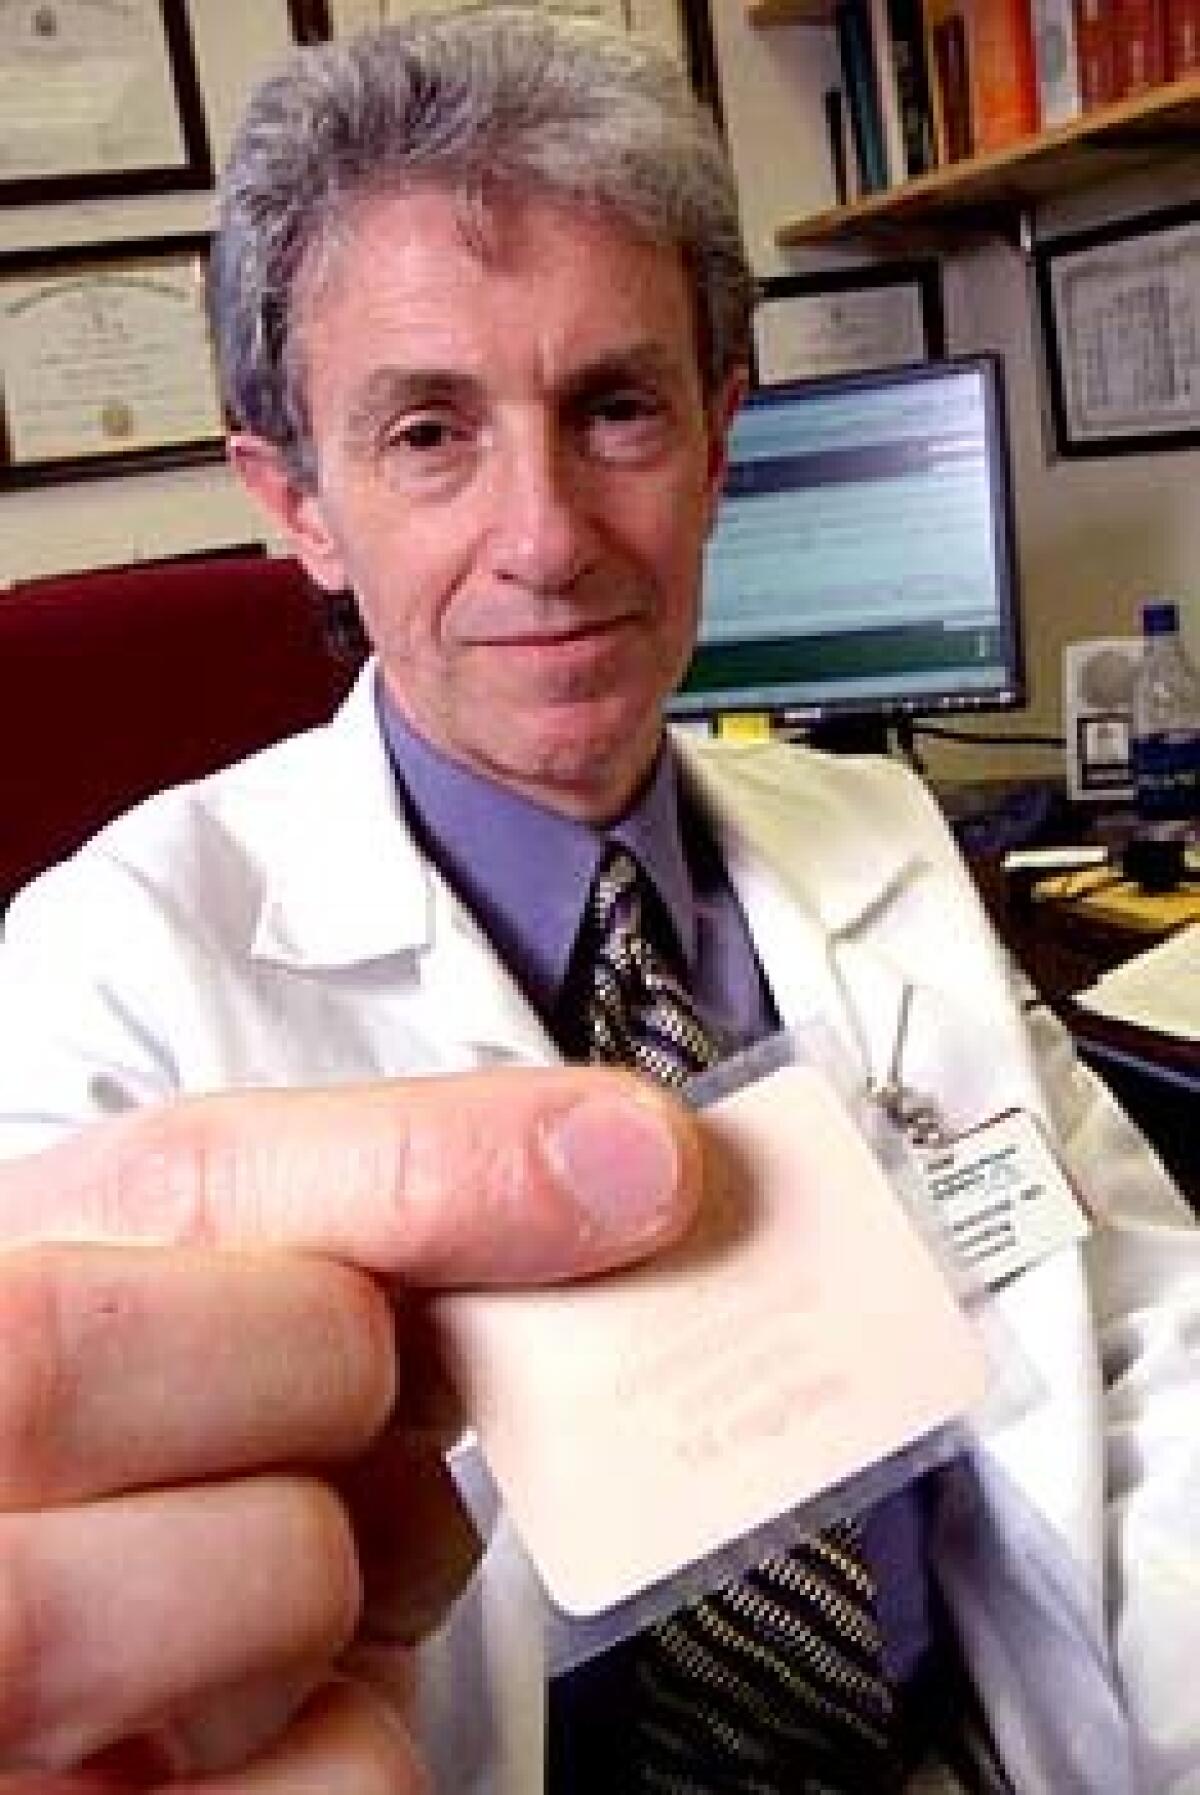 Dr. Paul Newhouse of the University of Vermont holds a nicotine patch, which he is researching as a possible treatment for cognitive impairment.